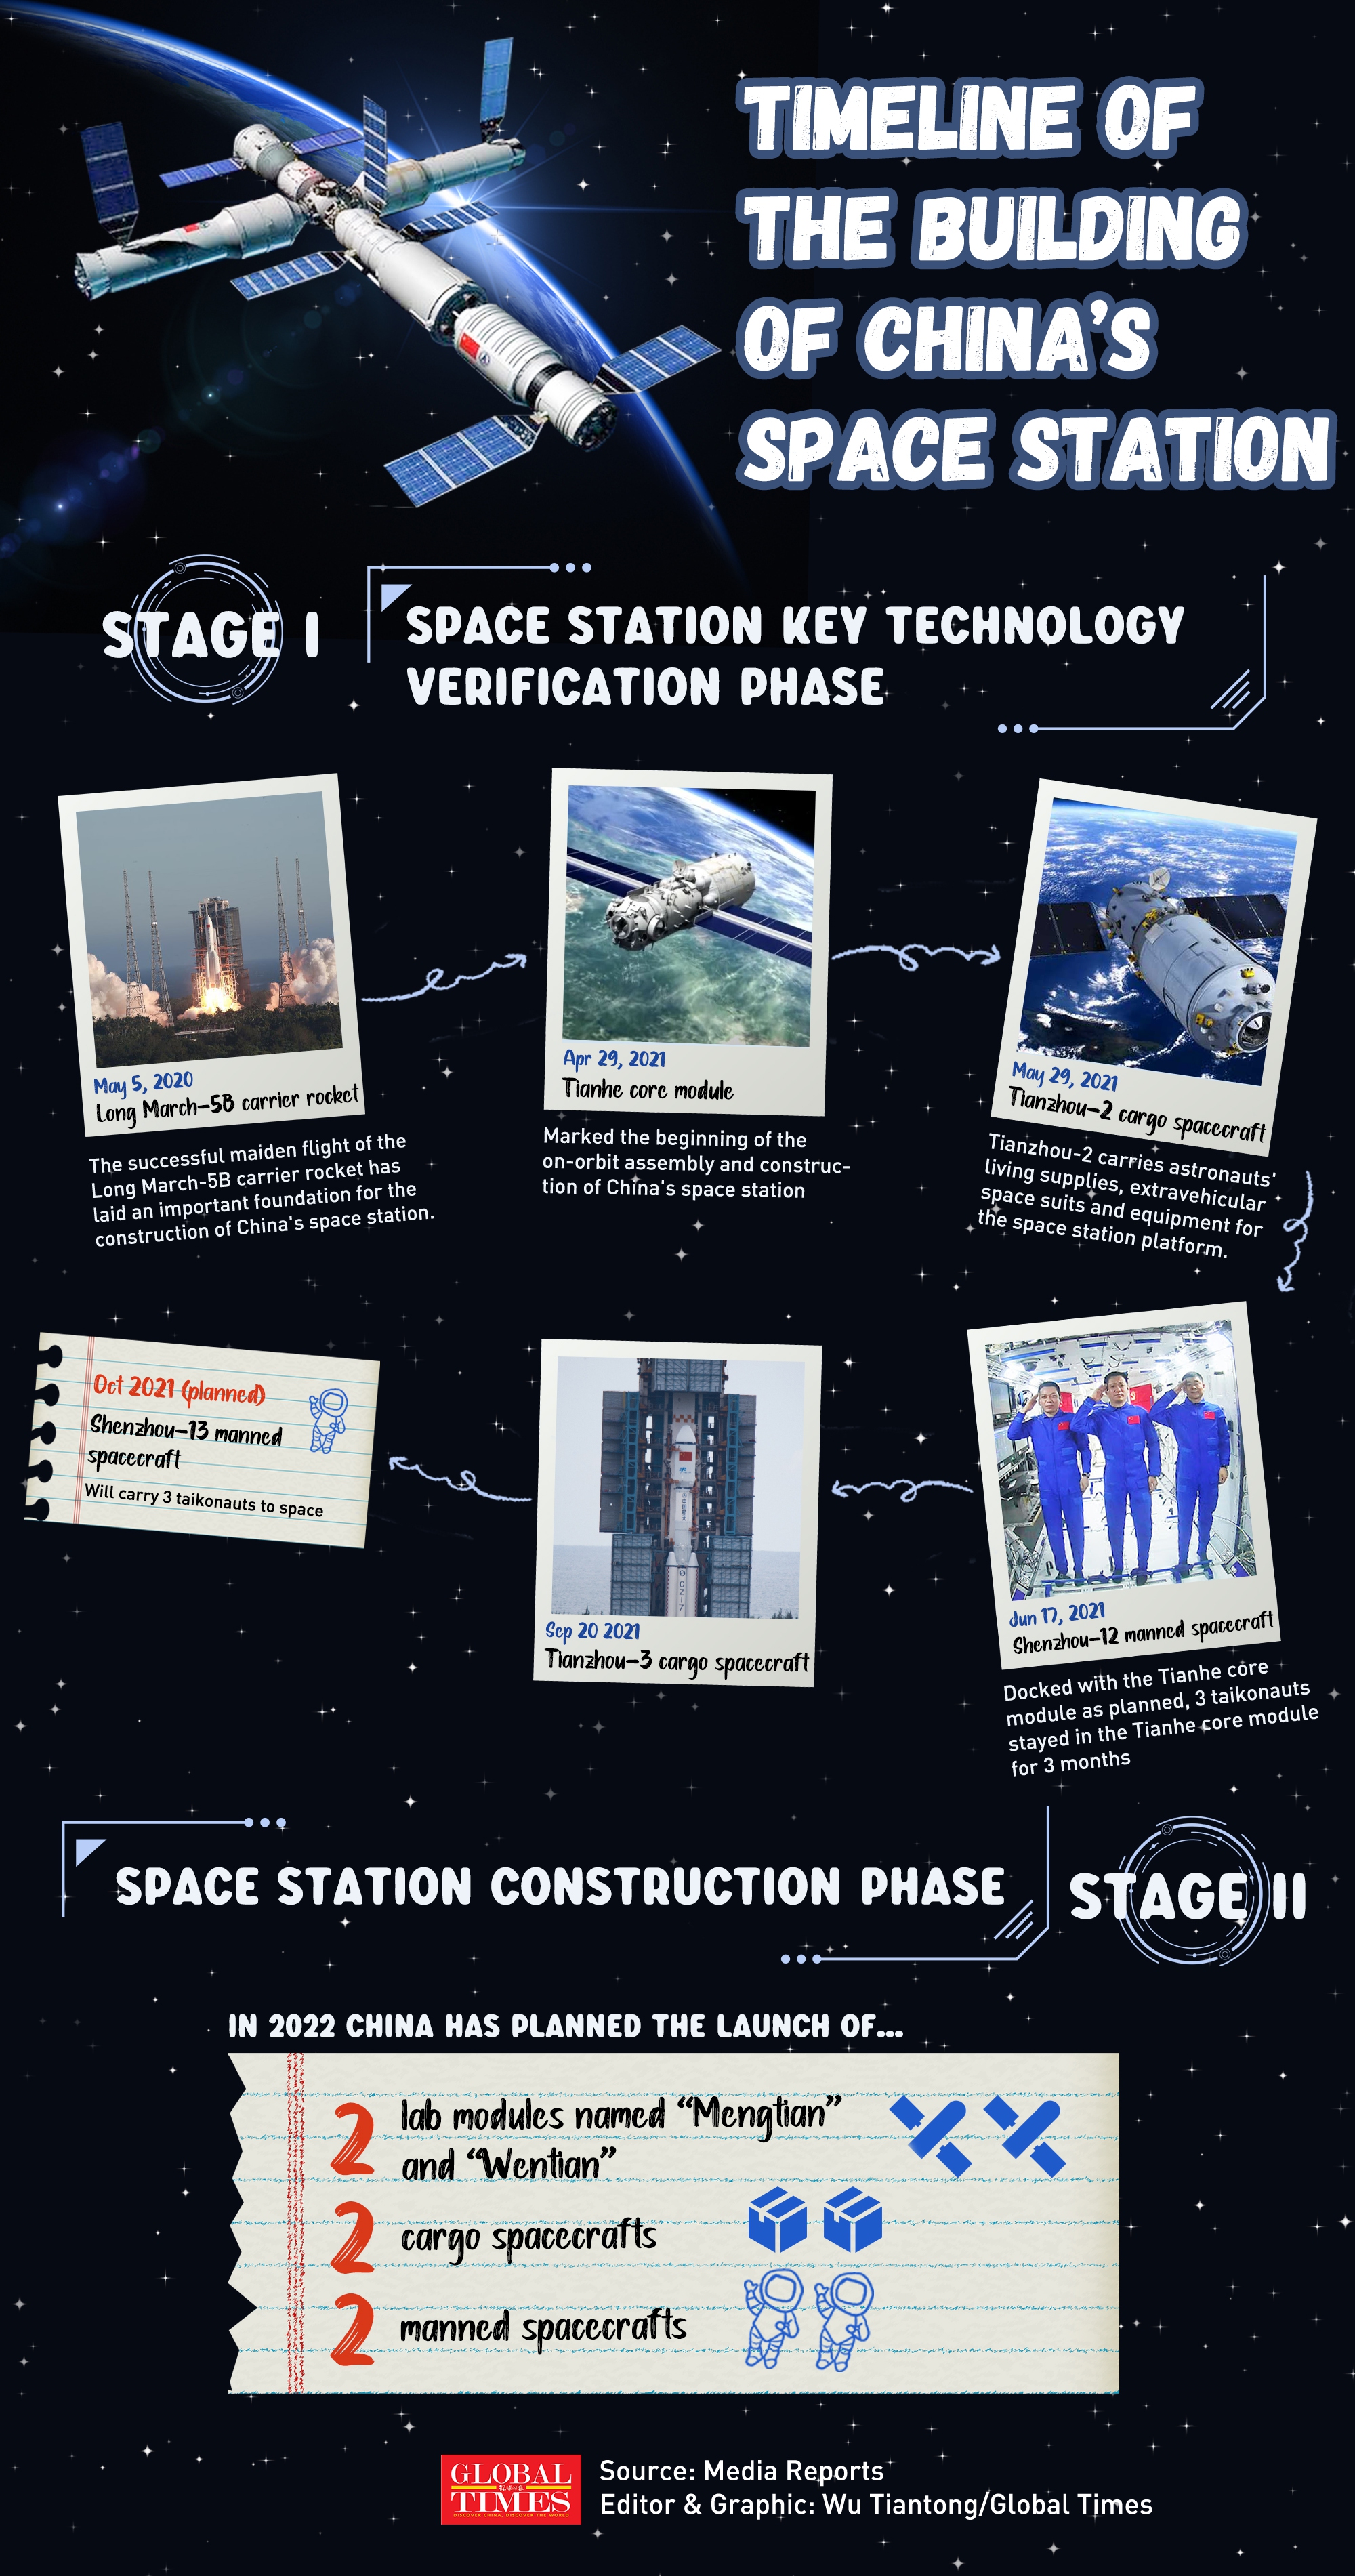 Timeline of the building of China’s space station.